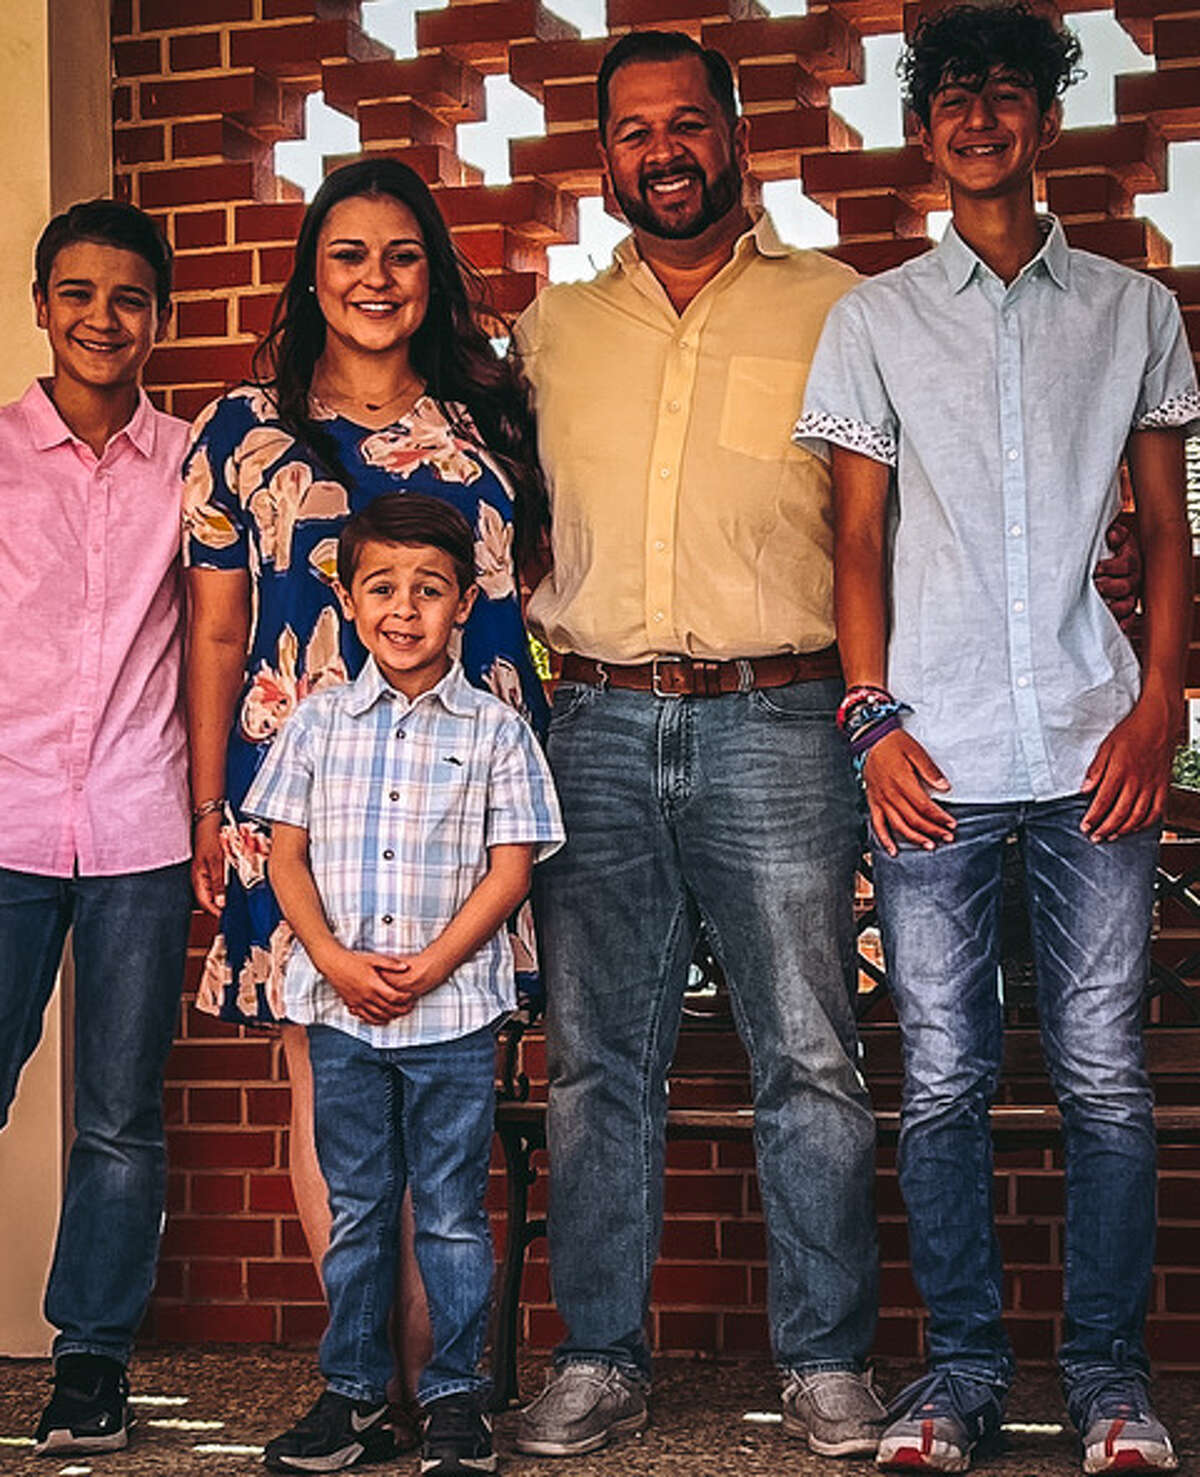 The Alabama-based gourmet popsicle franchise with a focus on philanthropy is being brought to the Permian Basin by Midland’s Tabitha and Hector Garcia this fall.